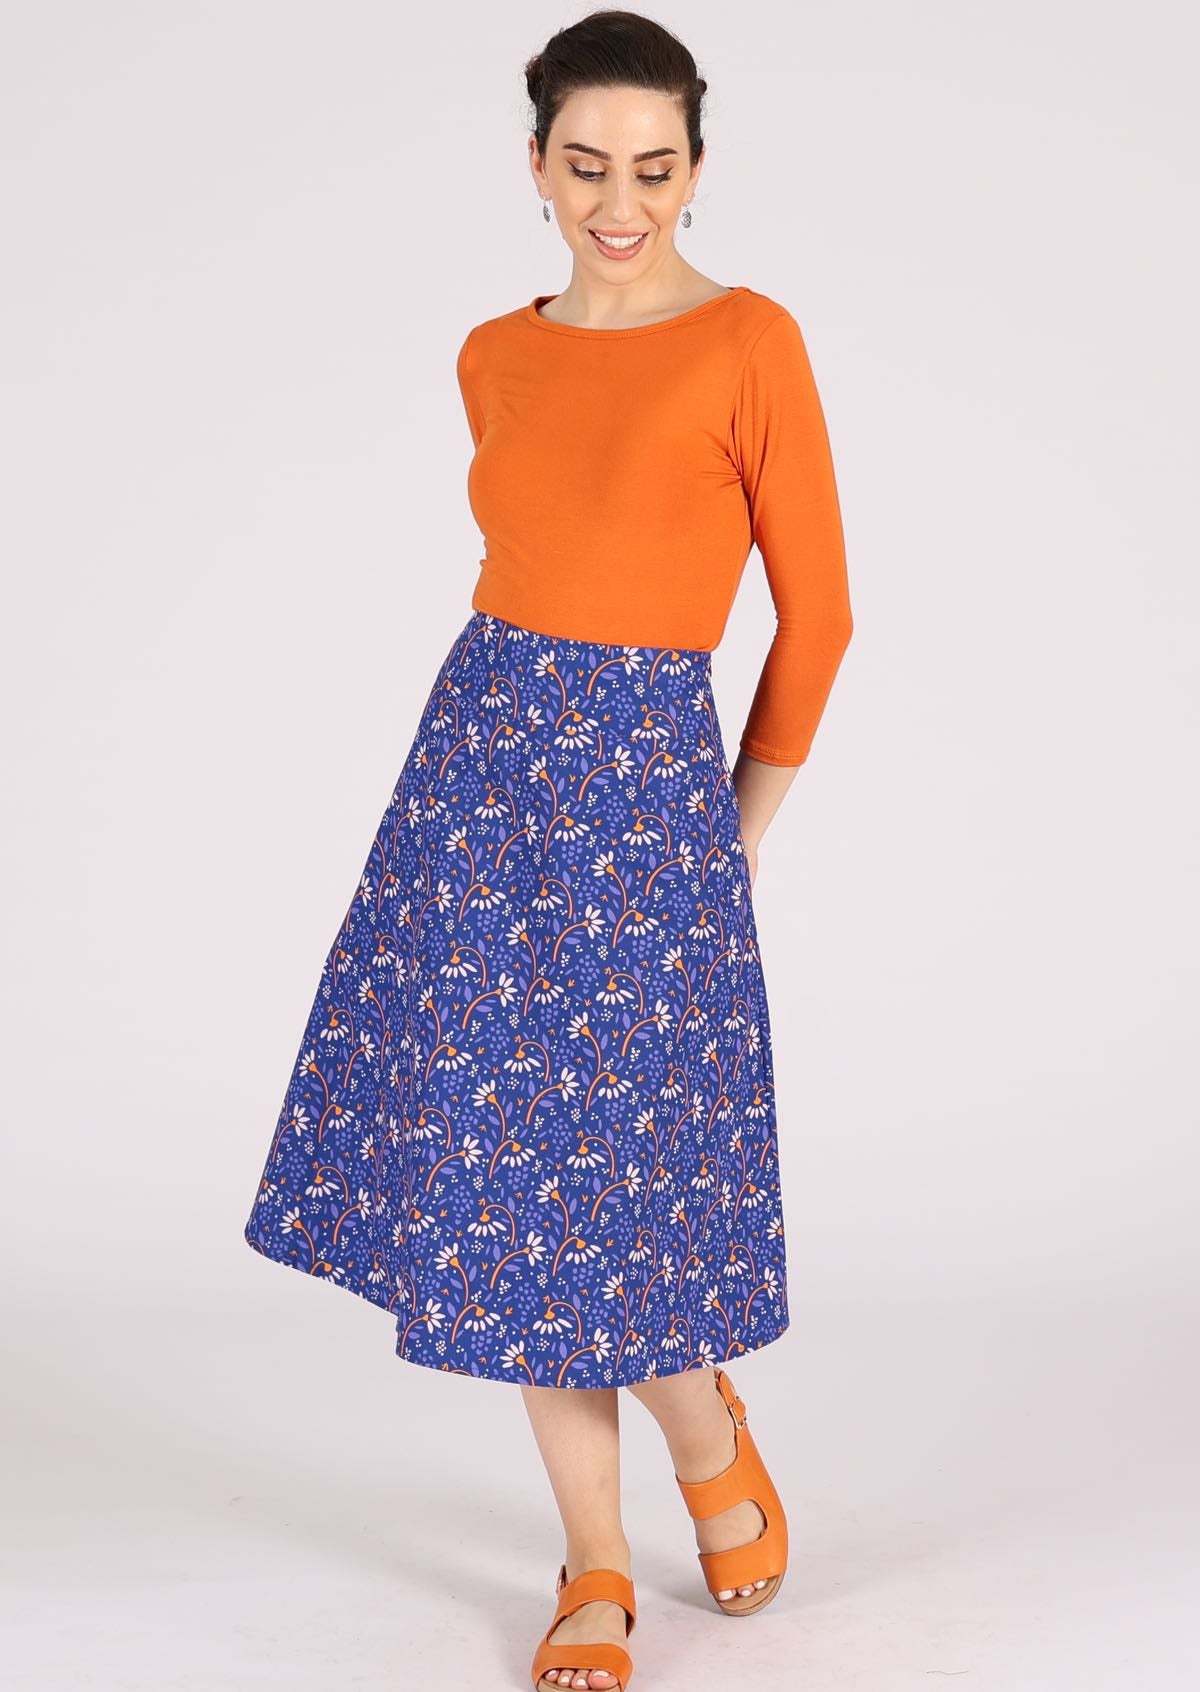 Fuller skirt with orange and white floral print on bright blue base